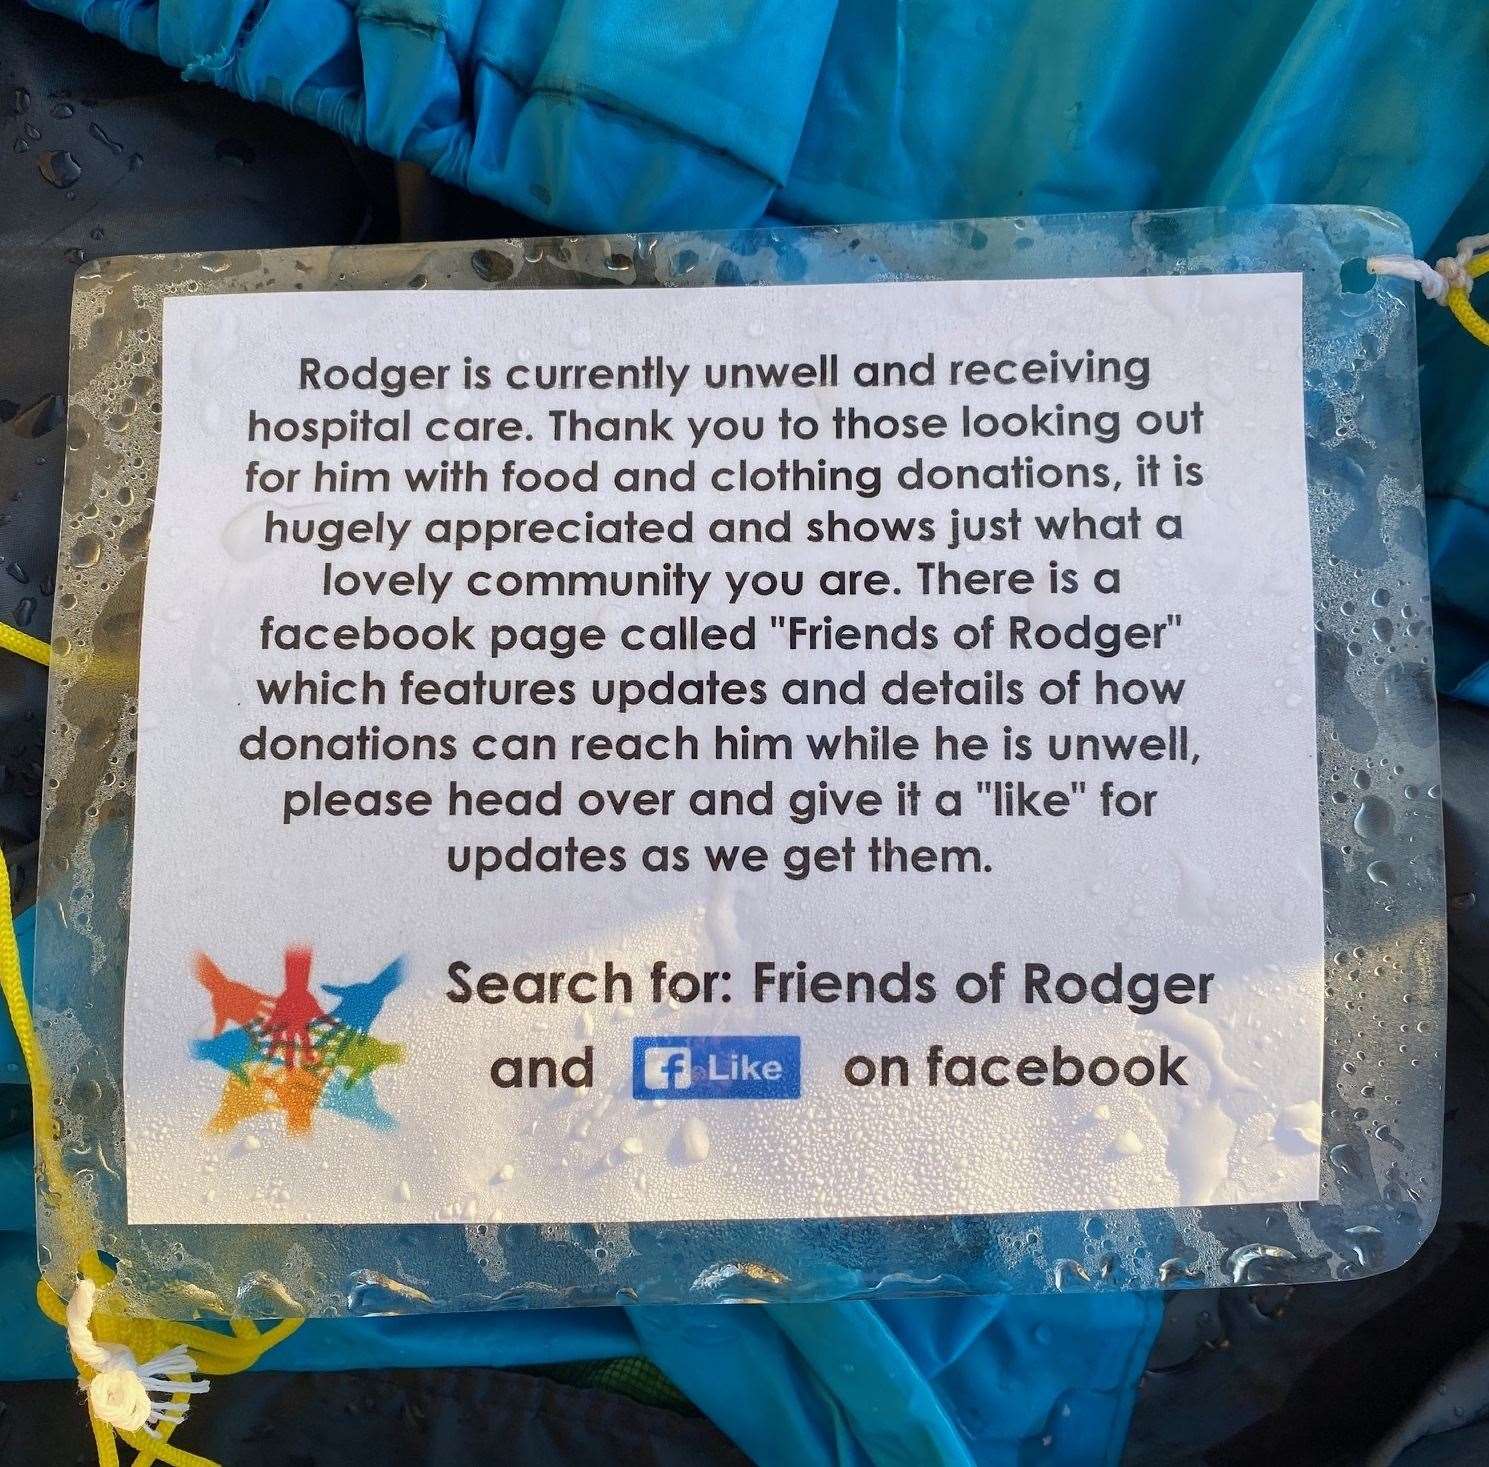 The note left on Roger's tent in St Andrew's Road, Barming, in Maidstone